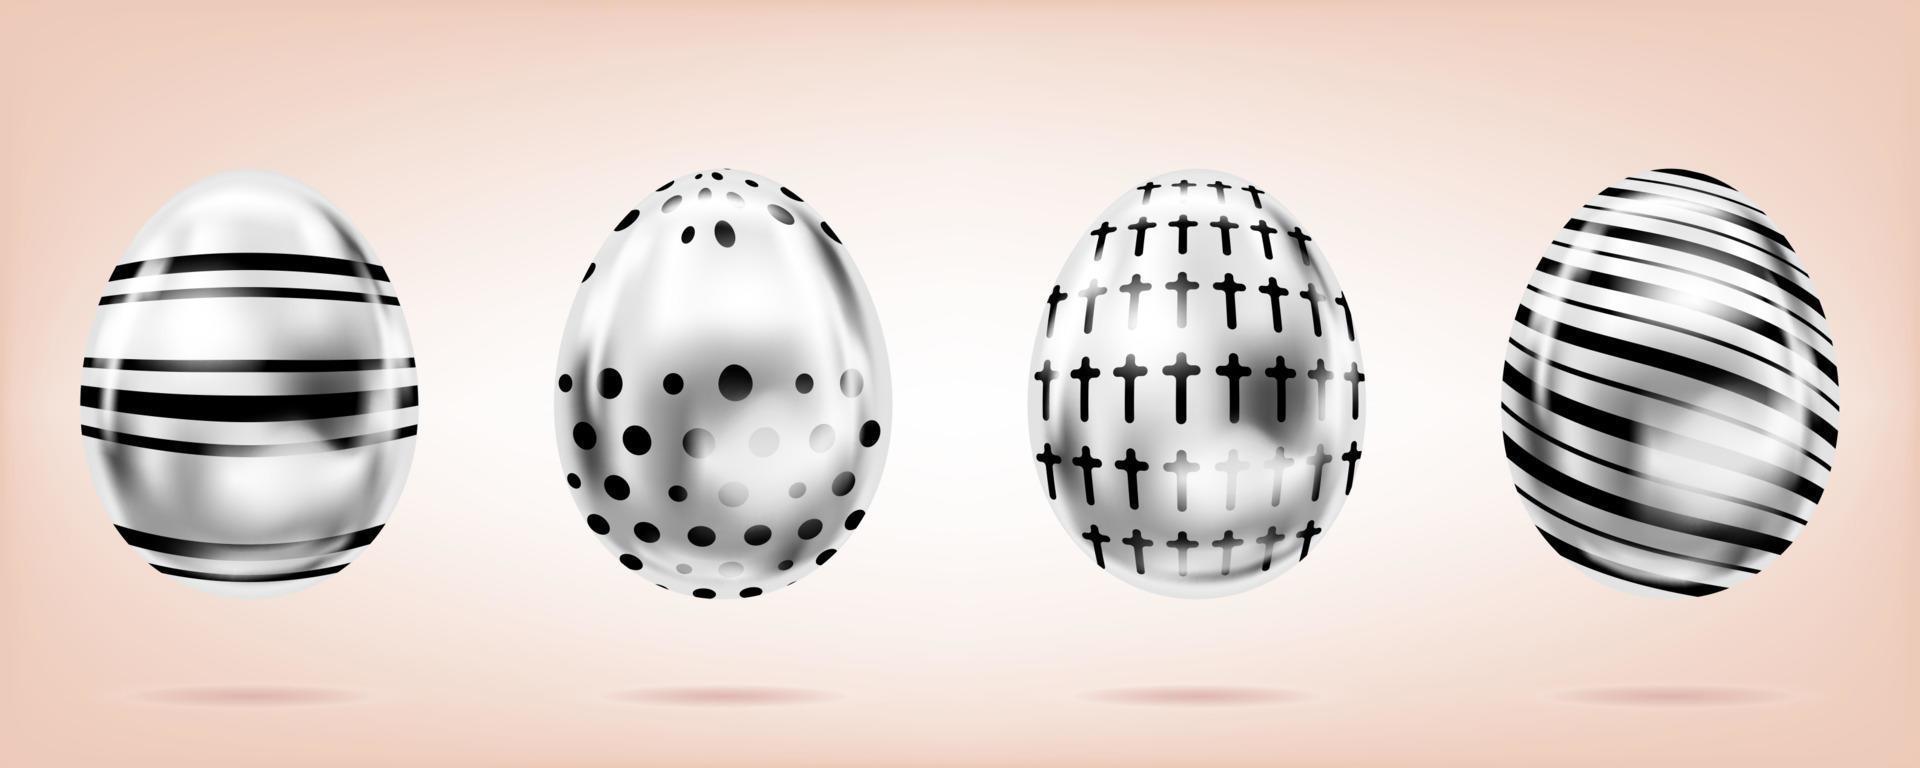 Four silver eggs on the pink background. Isolated objects for Easter decoration. Cross, dots and stripes ornate vector